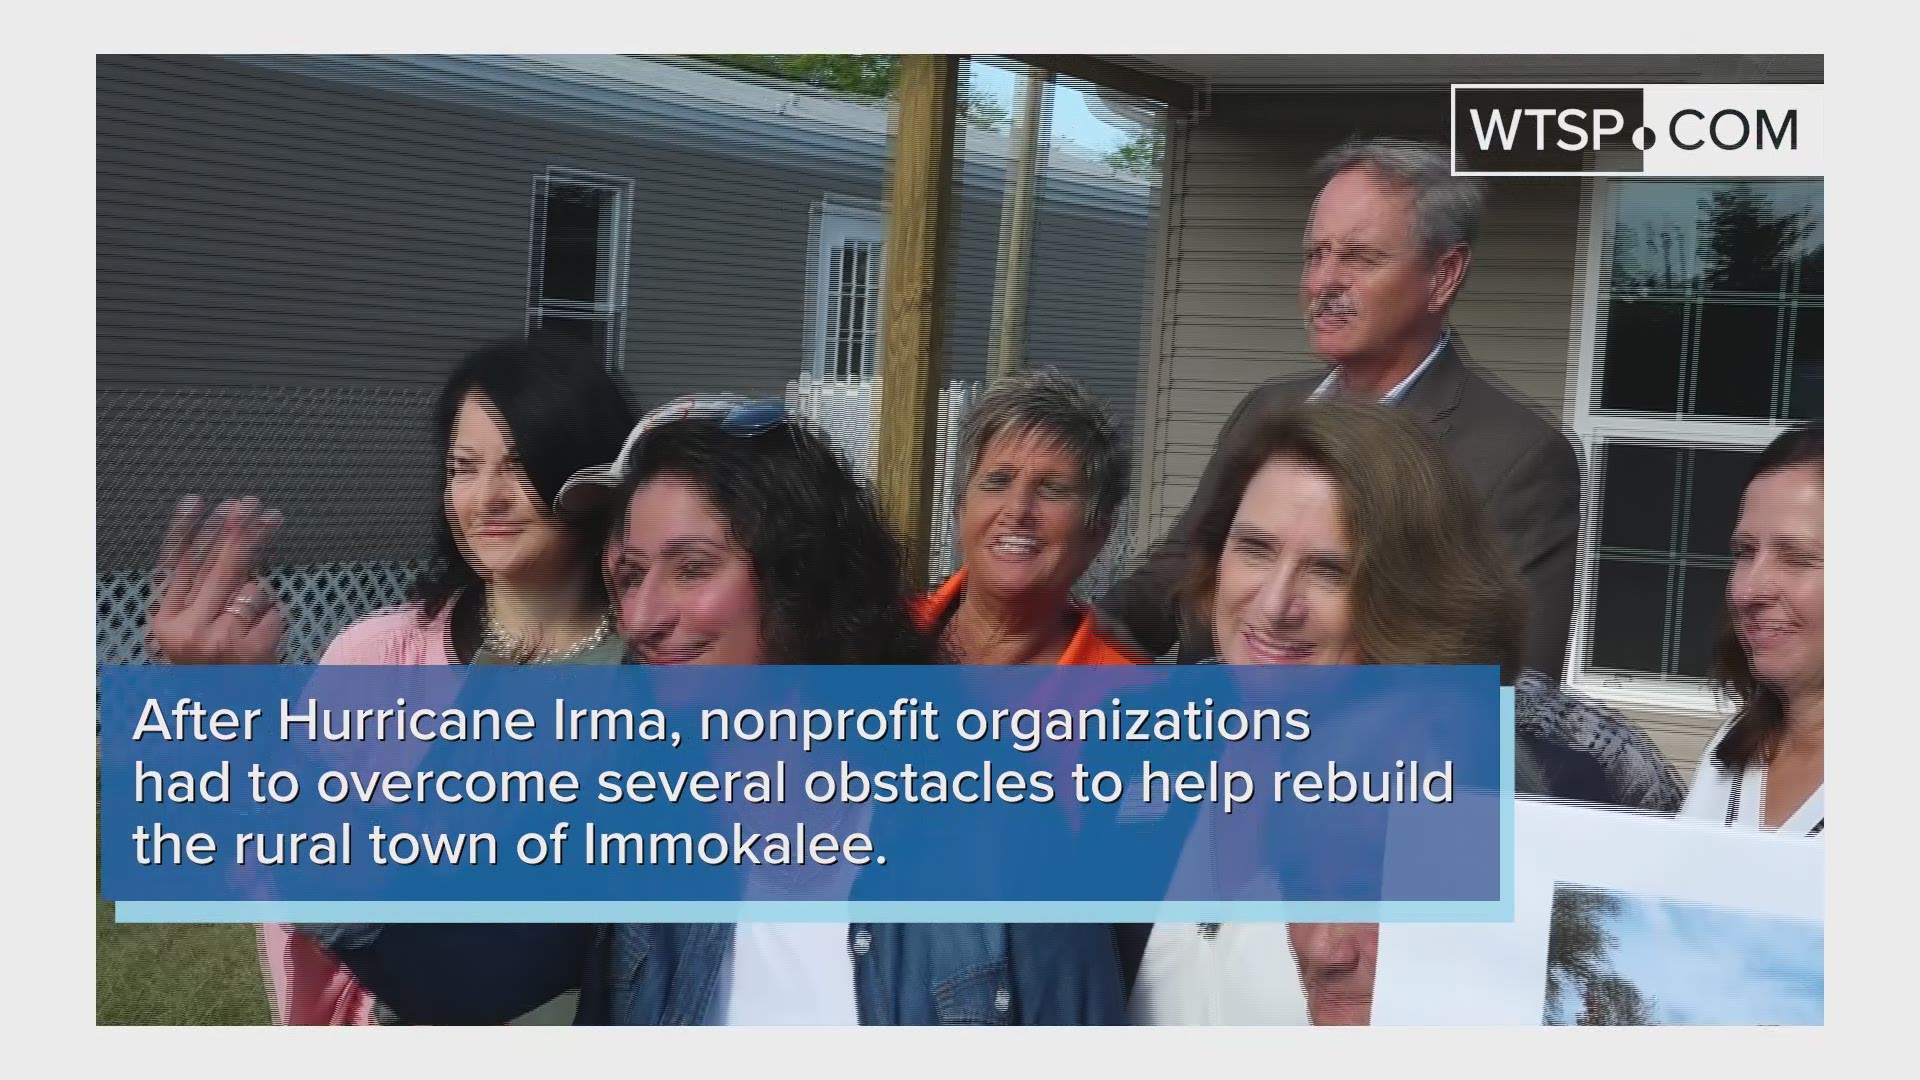 It's important to remember every state has a town or city that has unmet needs. Immokalee is just one of them. FULL STORY: https://on.wtsp.com/2WCvPQU